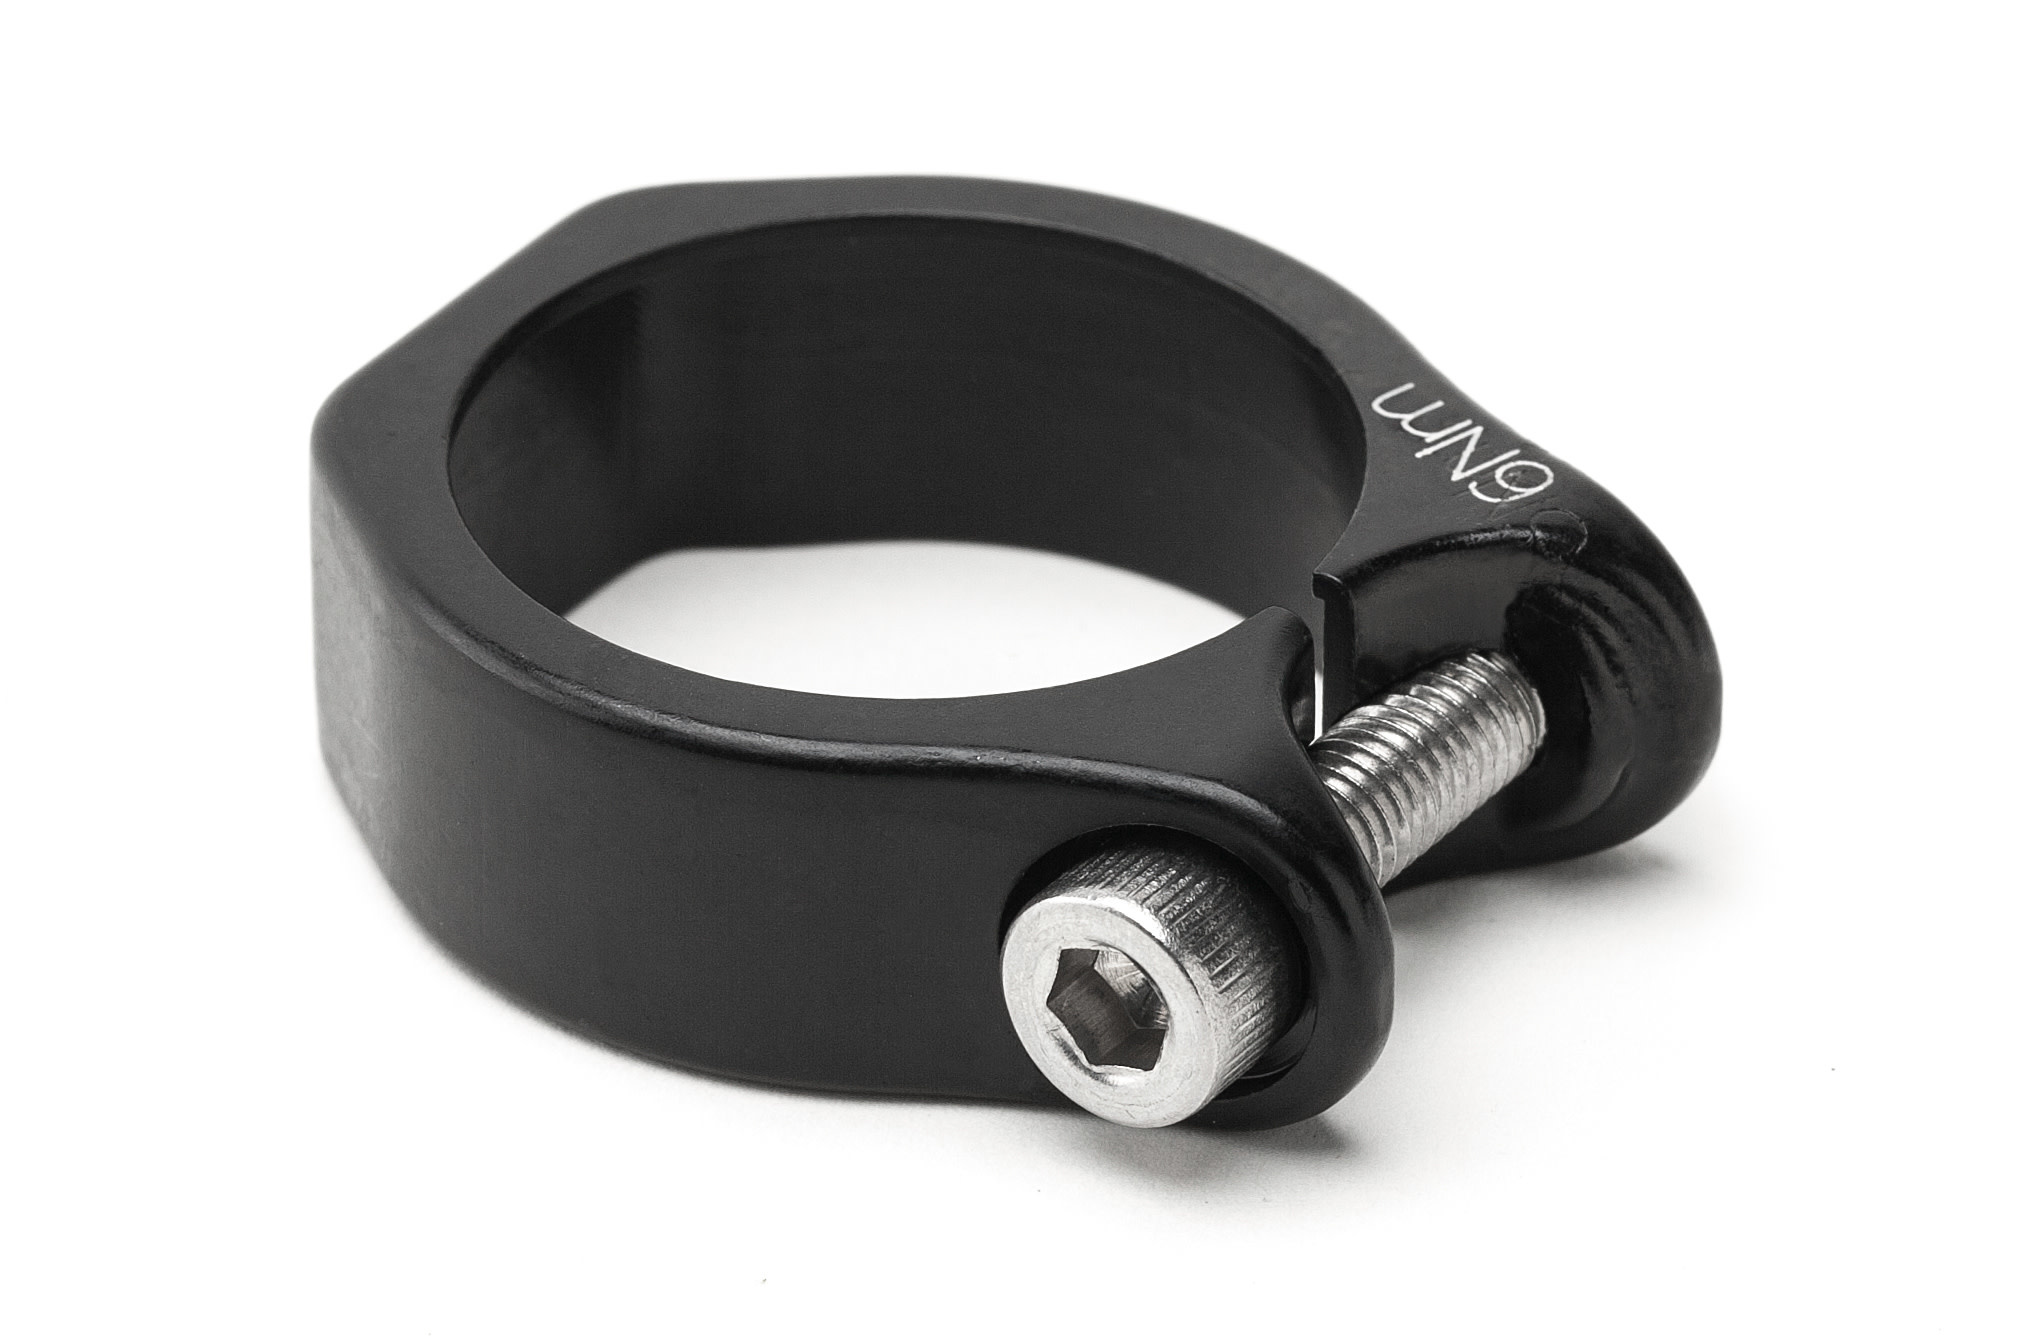 R-Series 2011 Seat Post Clamp | Winter Park Cycles - Winter Park